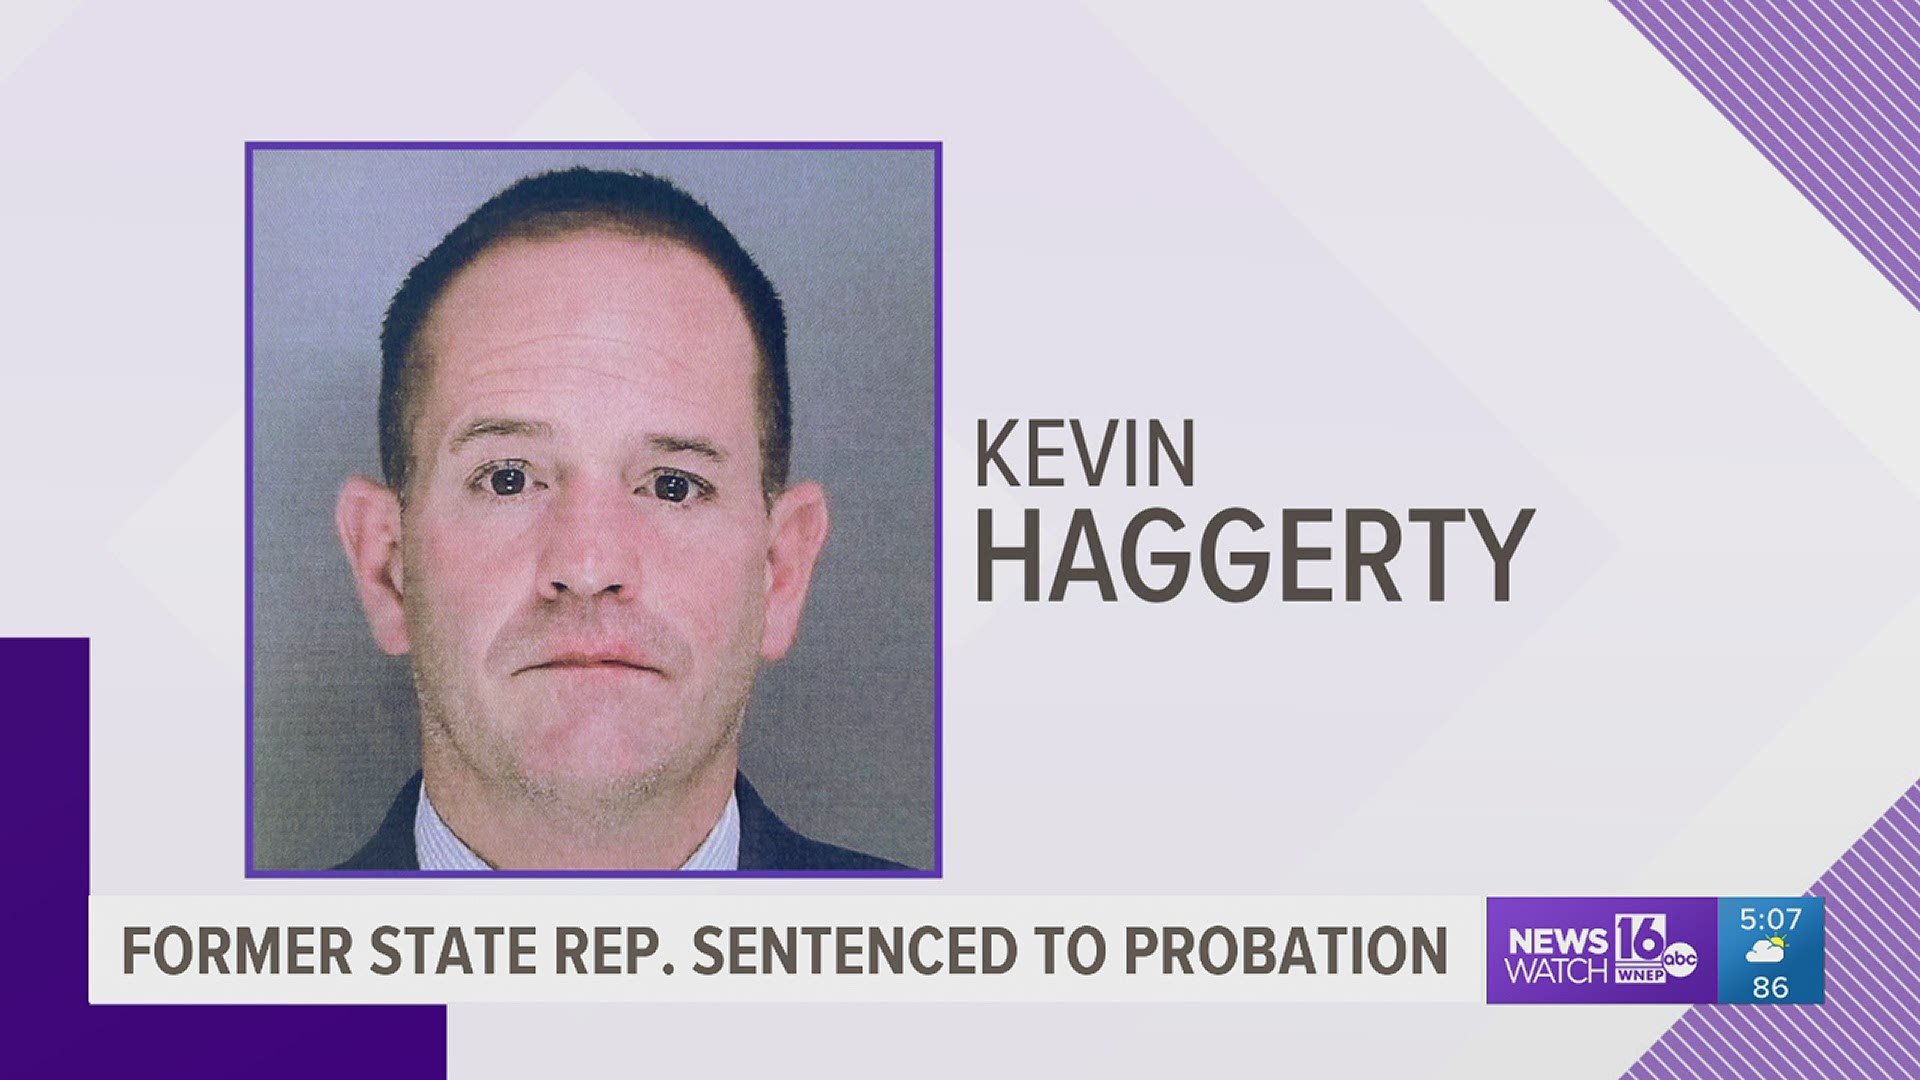 Kevin Haggerty, from Dunmore, was sentenced Tuesday morning to three years of probation after pleading guilty to theft and fraud charges earlier this year.